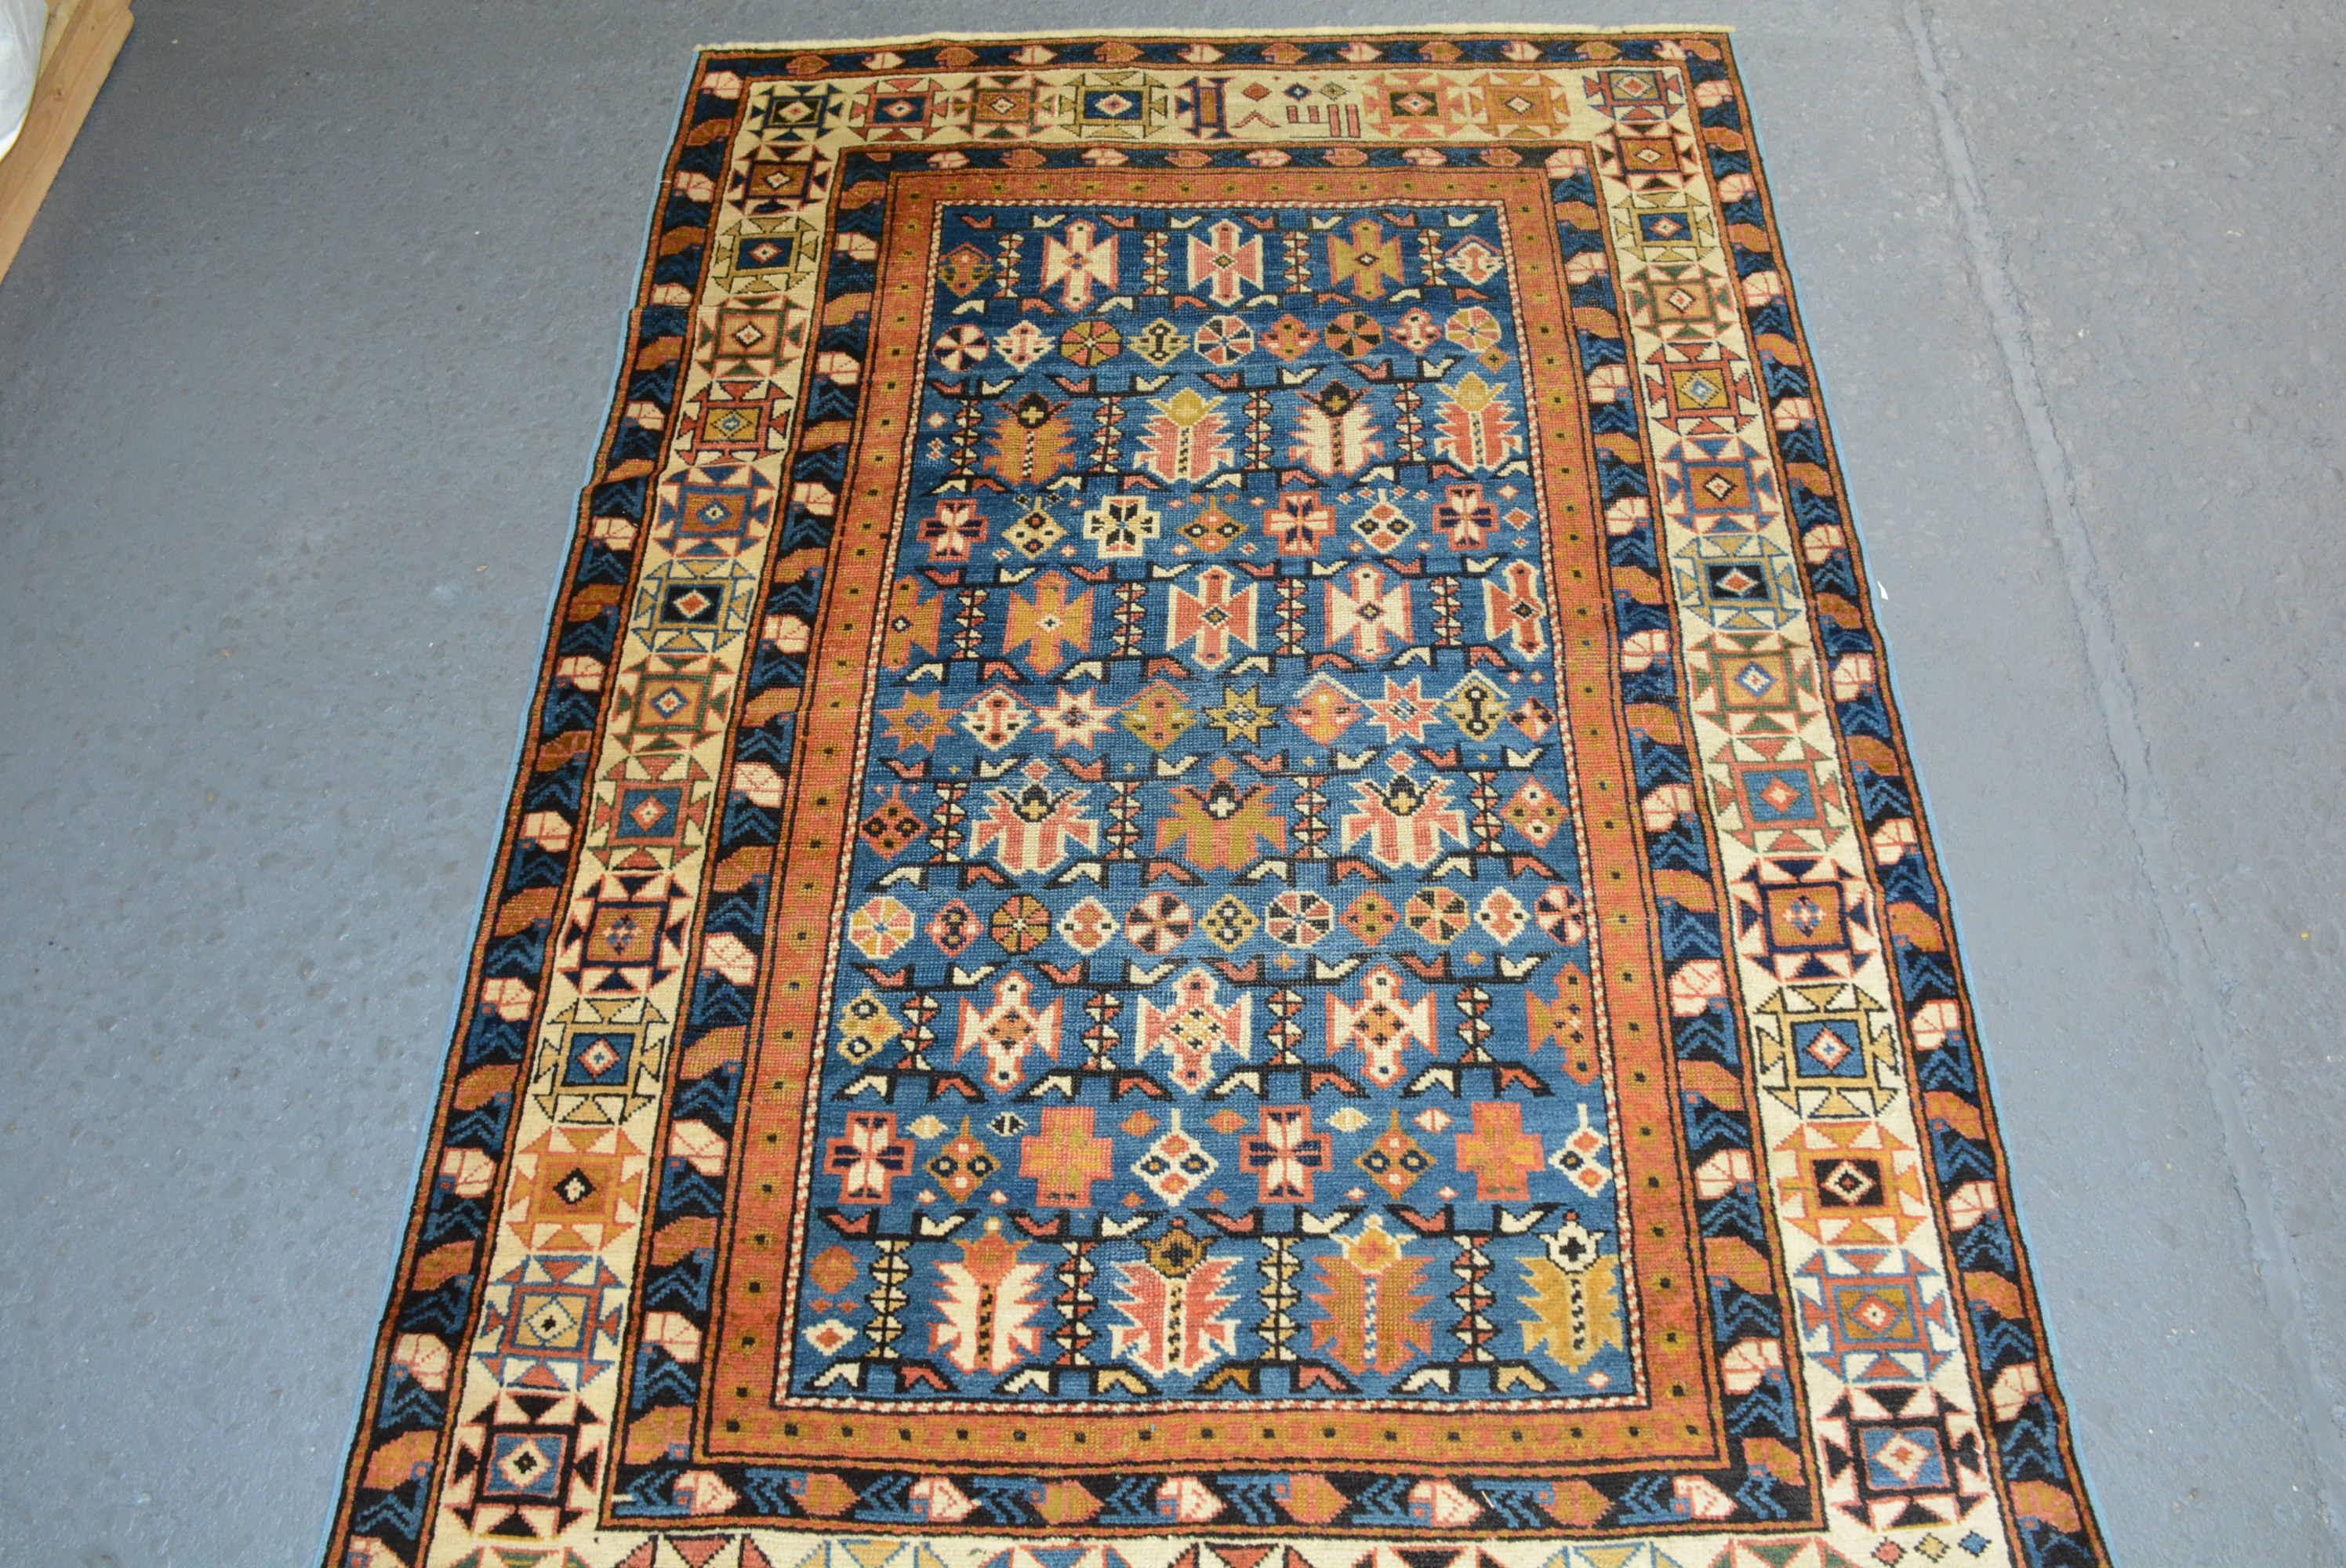 A Shirvan rug from the East Caucasus, dated 1308AH/1892AD in the top border, measuring 5' 6